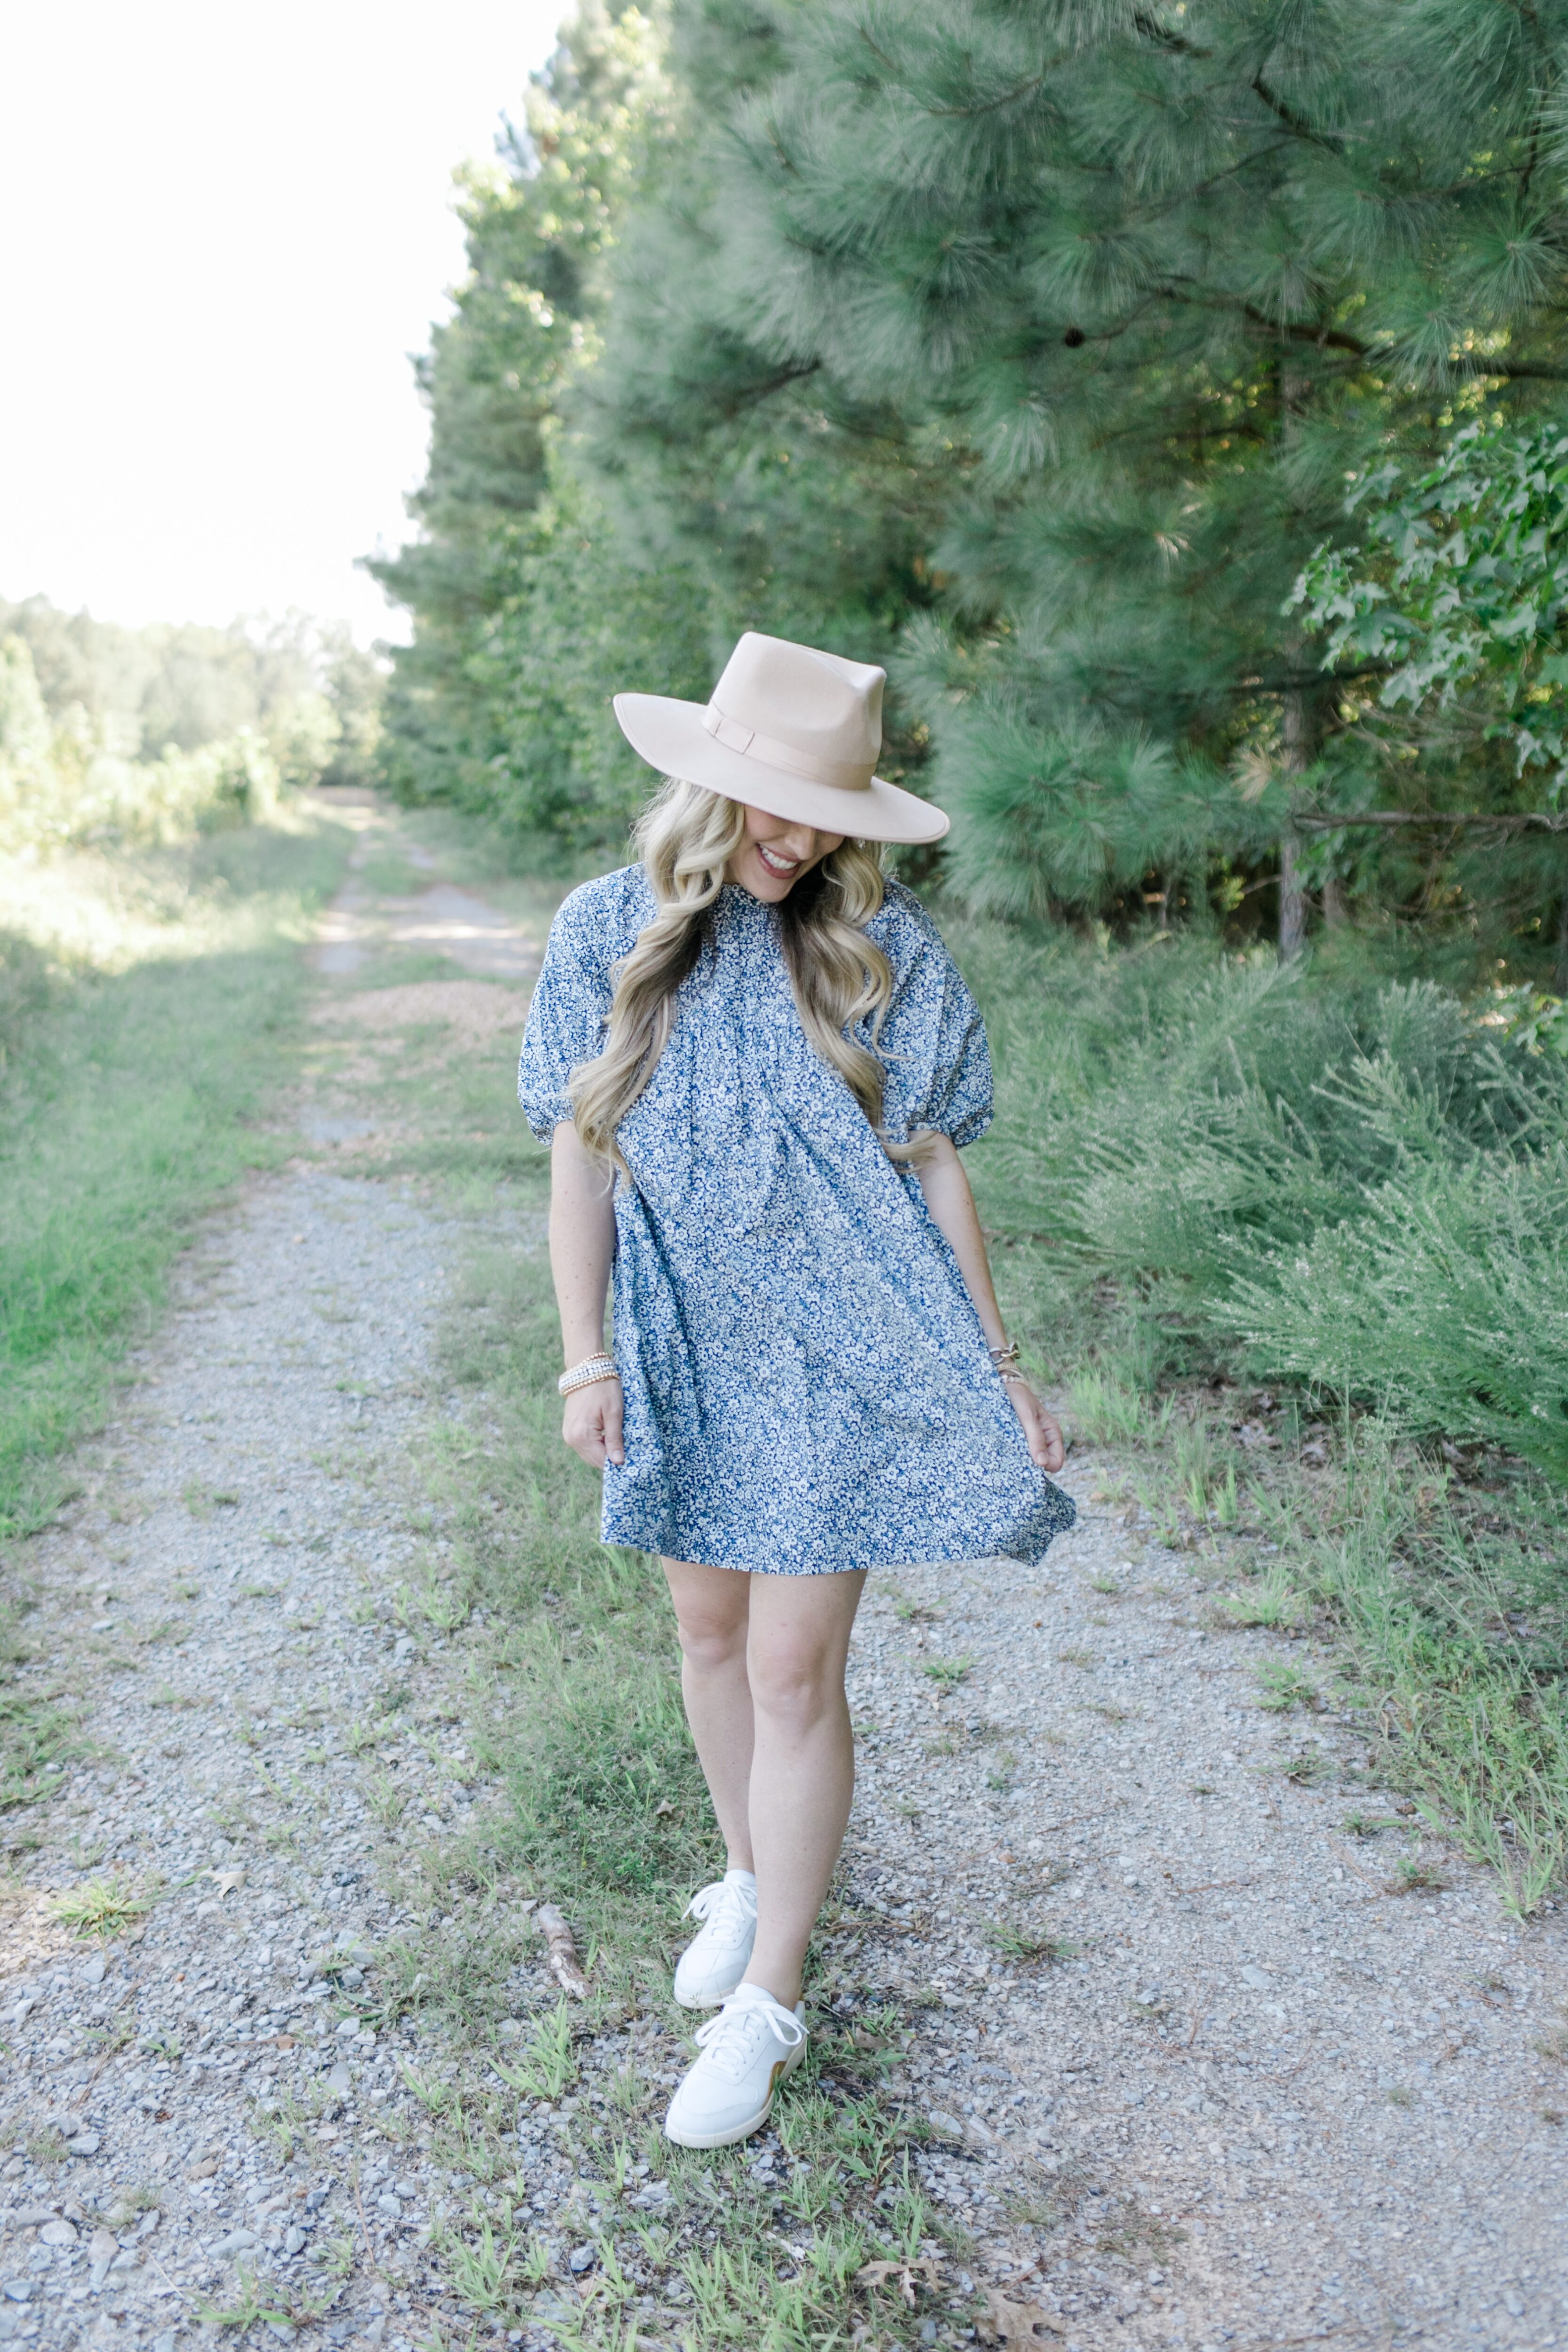 Fall floral dress styled by top US mom fashion blogger, Walking in Memphis in High Heels: image of a woman wearing an Everlane navy blue floral mini dress.